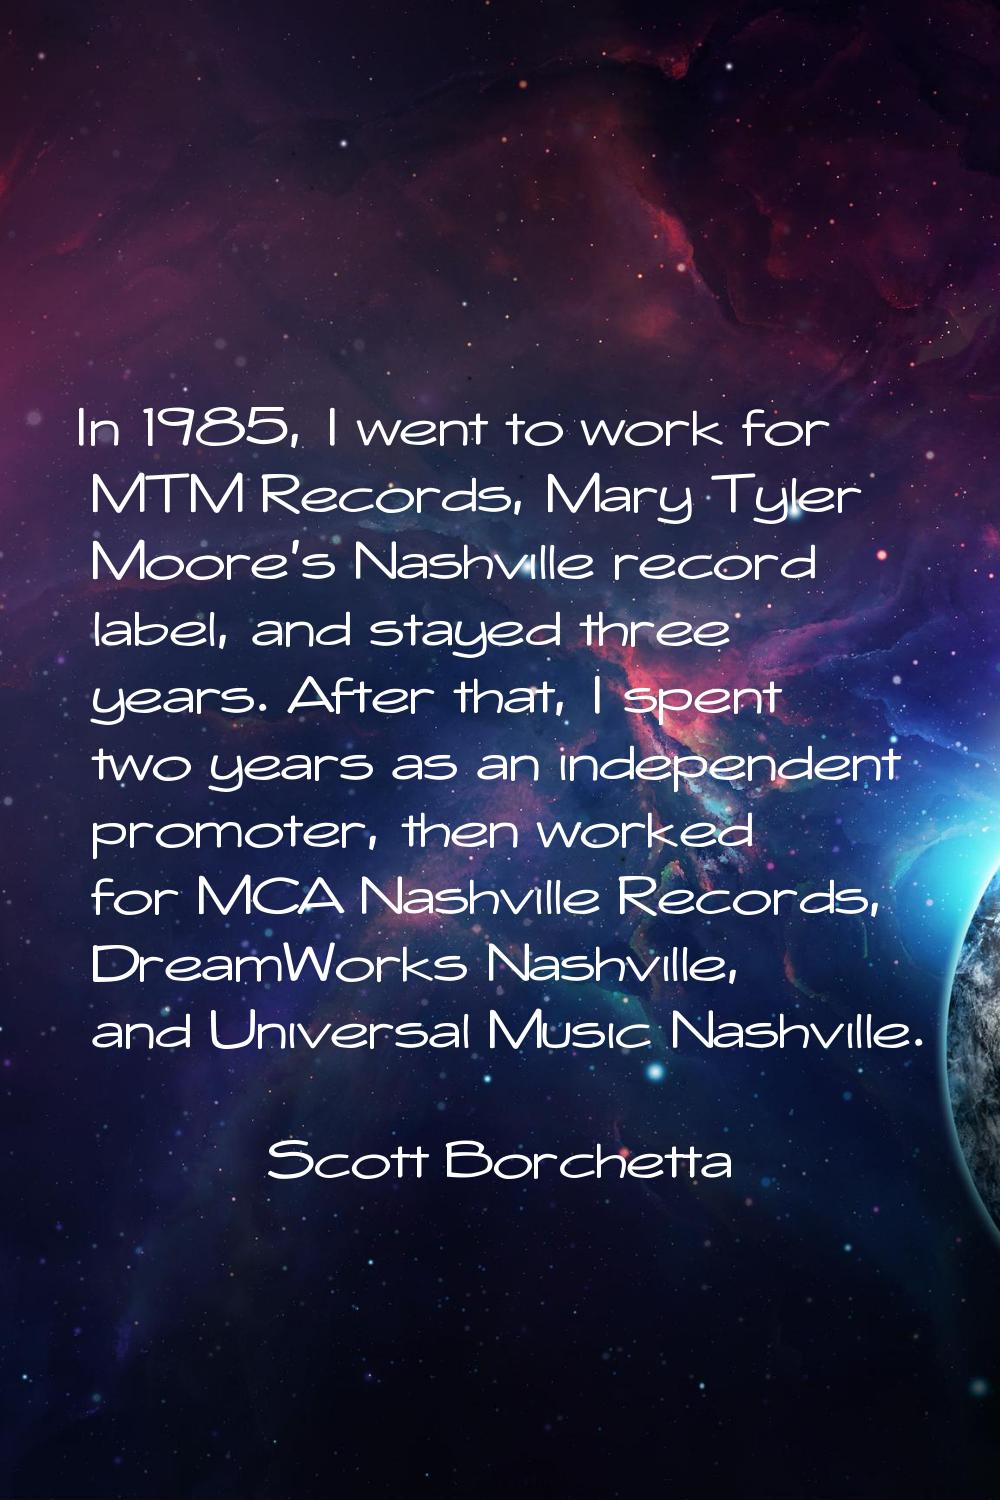 In 1985, I went to work for MTM Records, Mary Tyler Moore's Nashville record label, and stayed thre